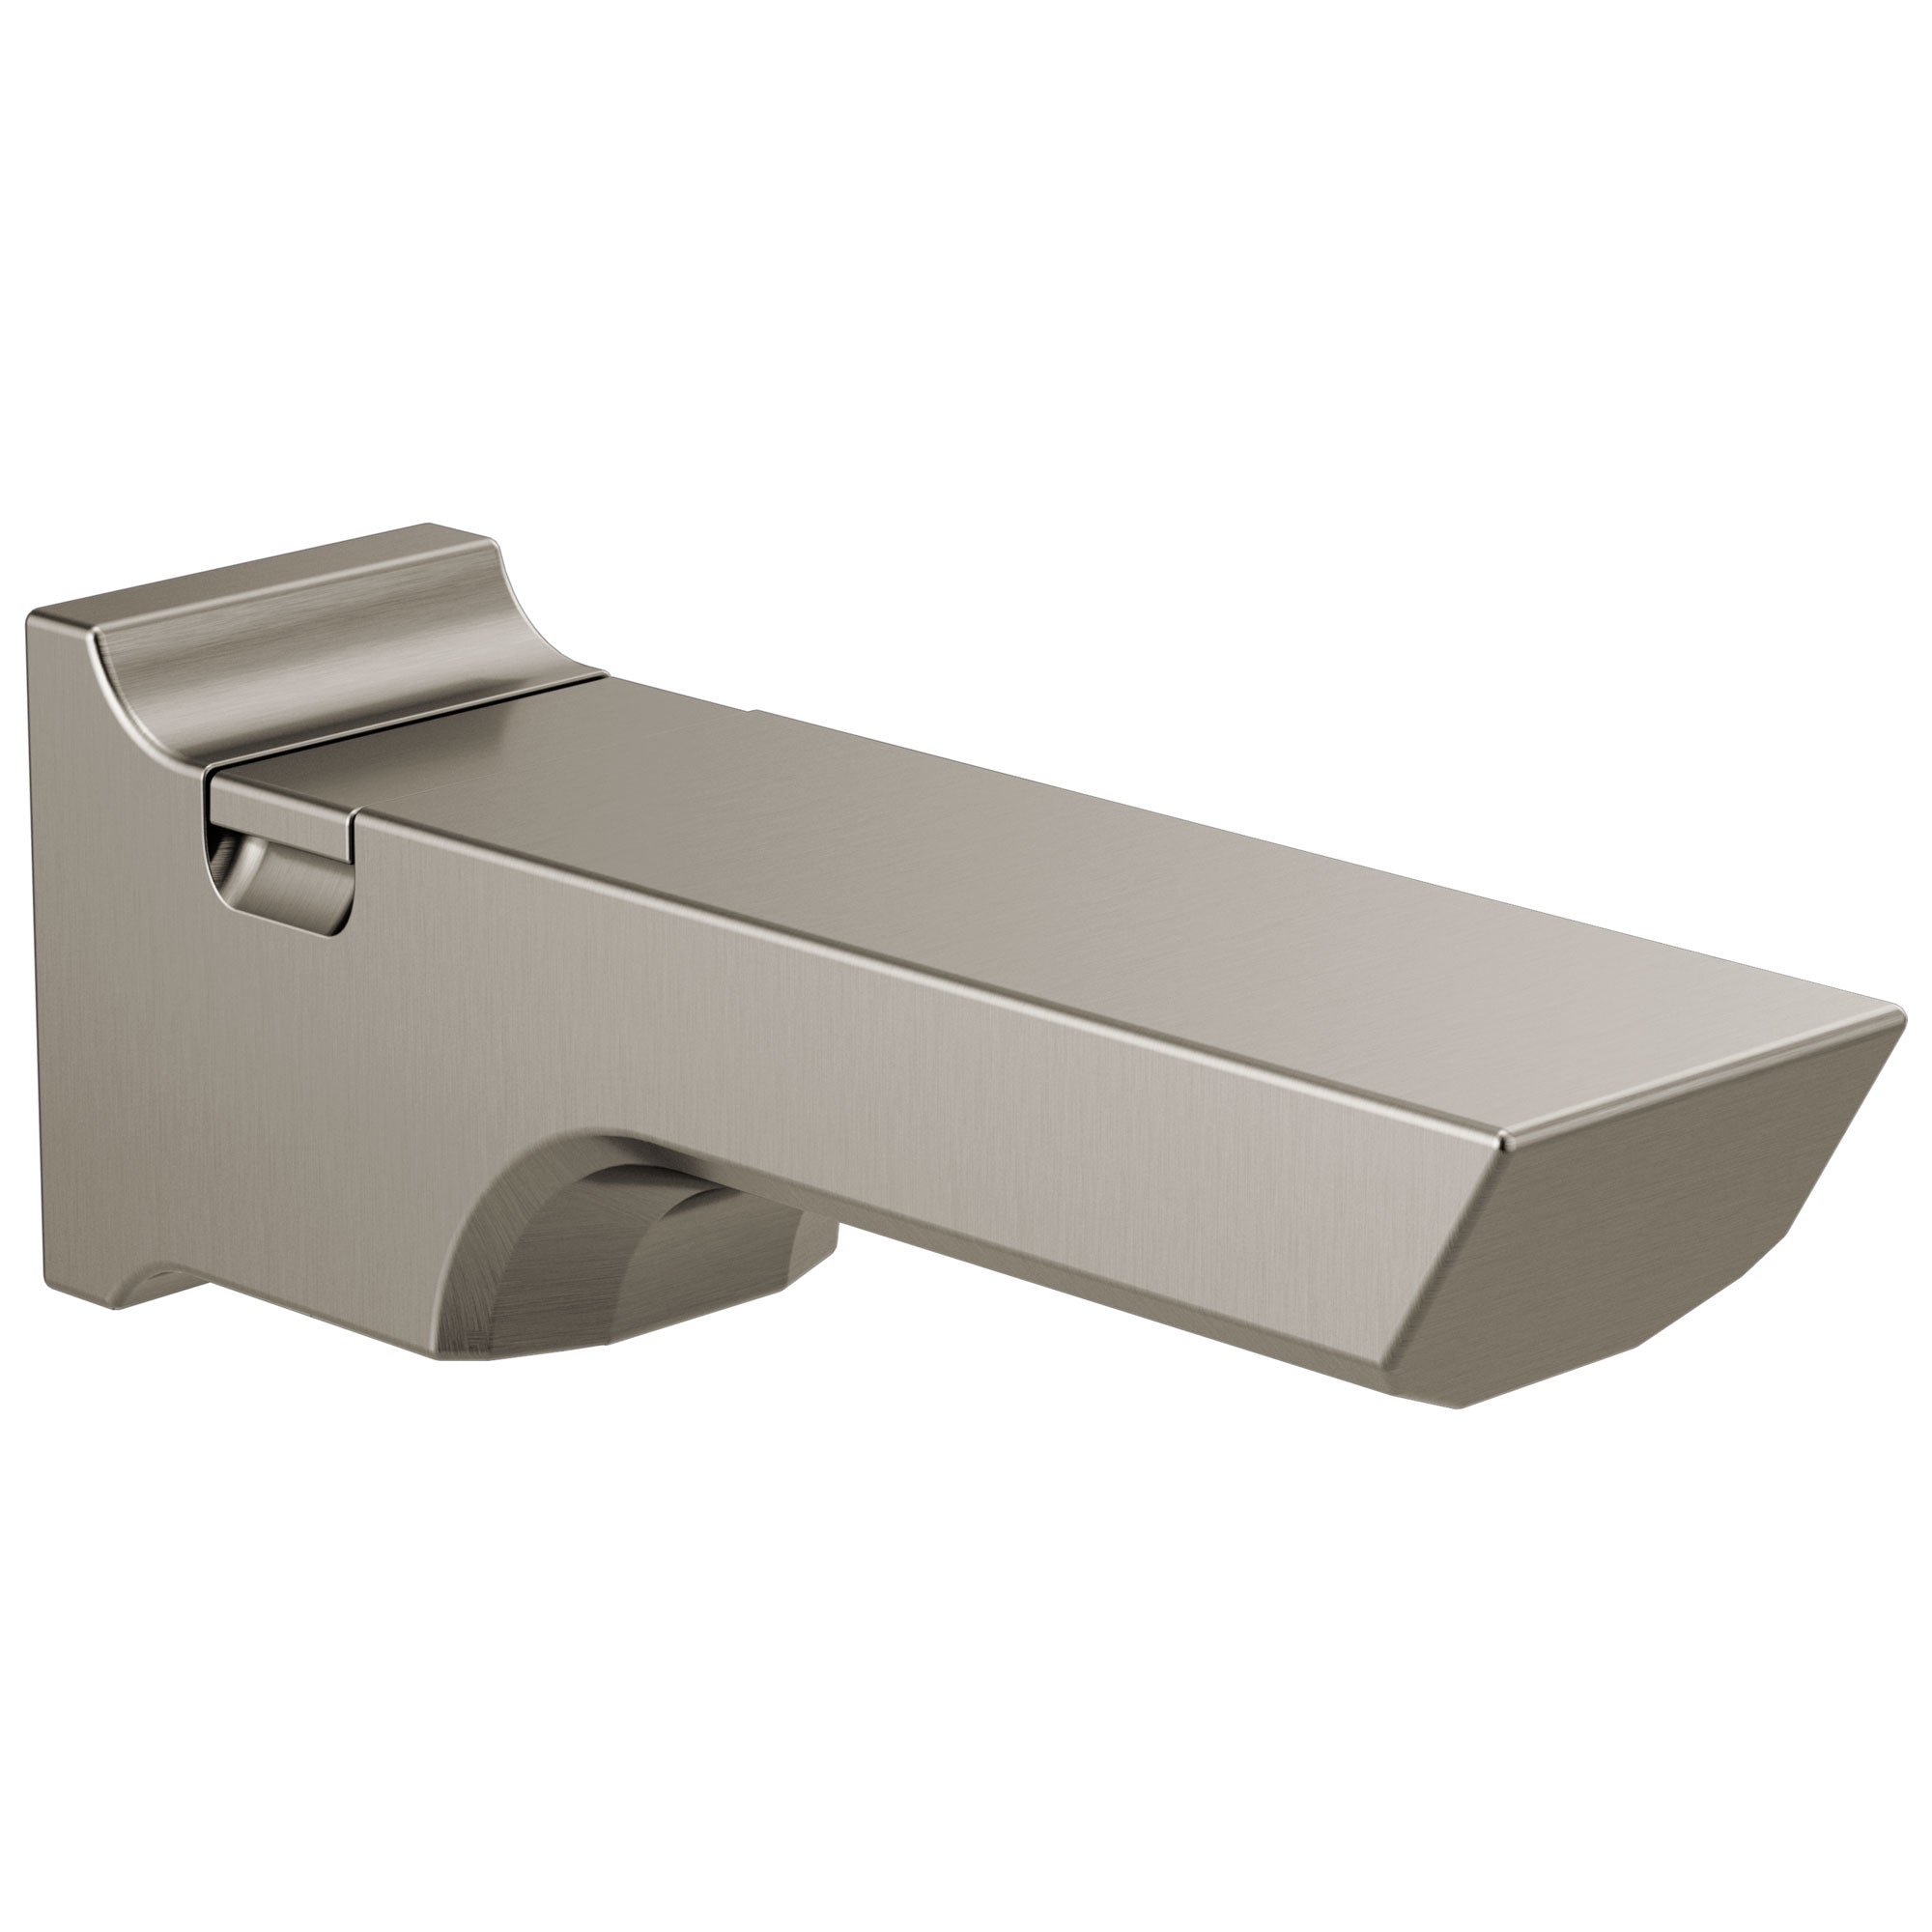 Delta Pivotal Stainless Steel Finish Pull-Up Diverter Tub Spout DRP90158SS